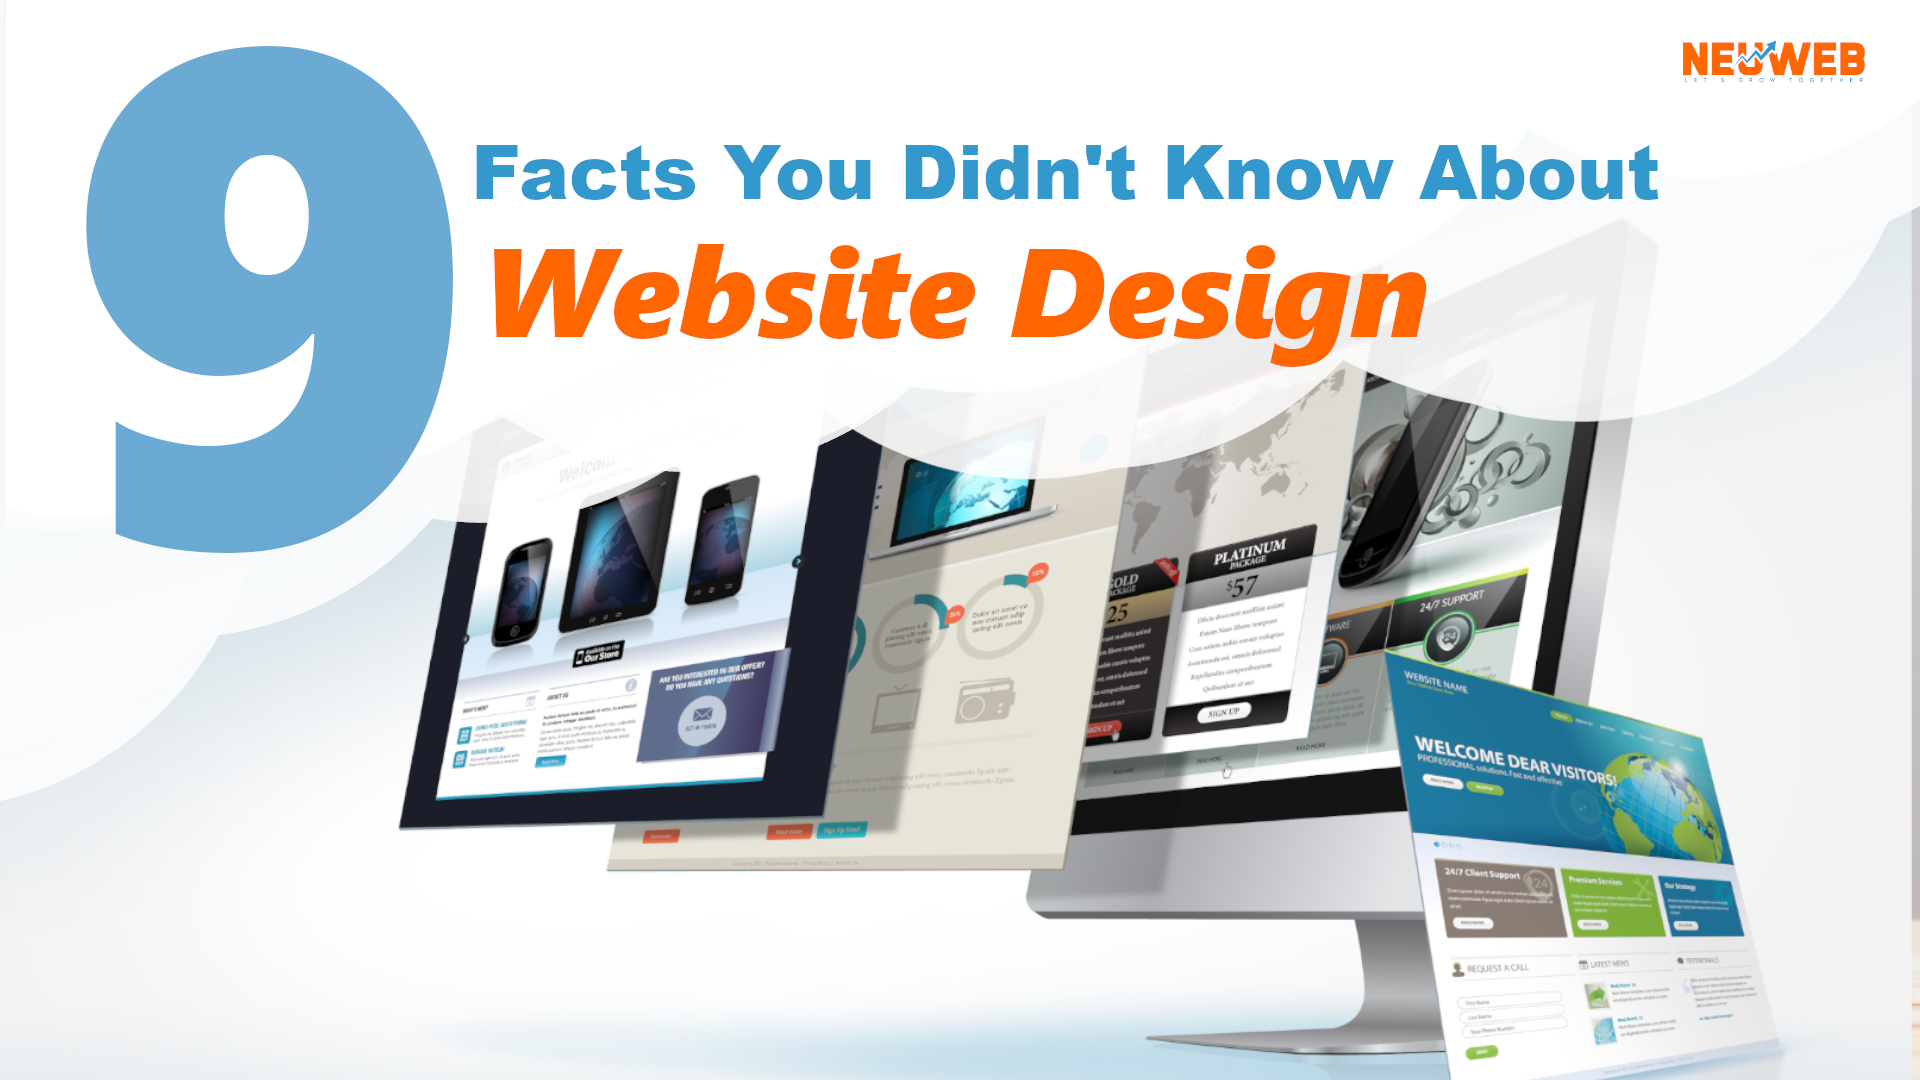 9 facts you didn't know about website design